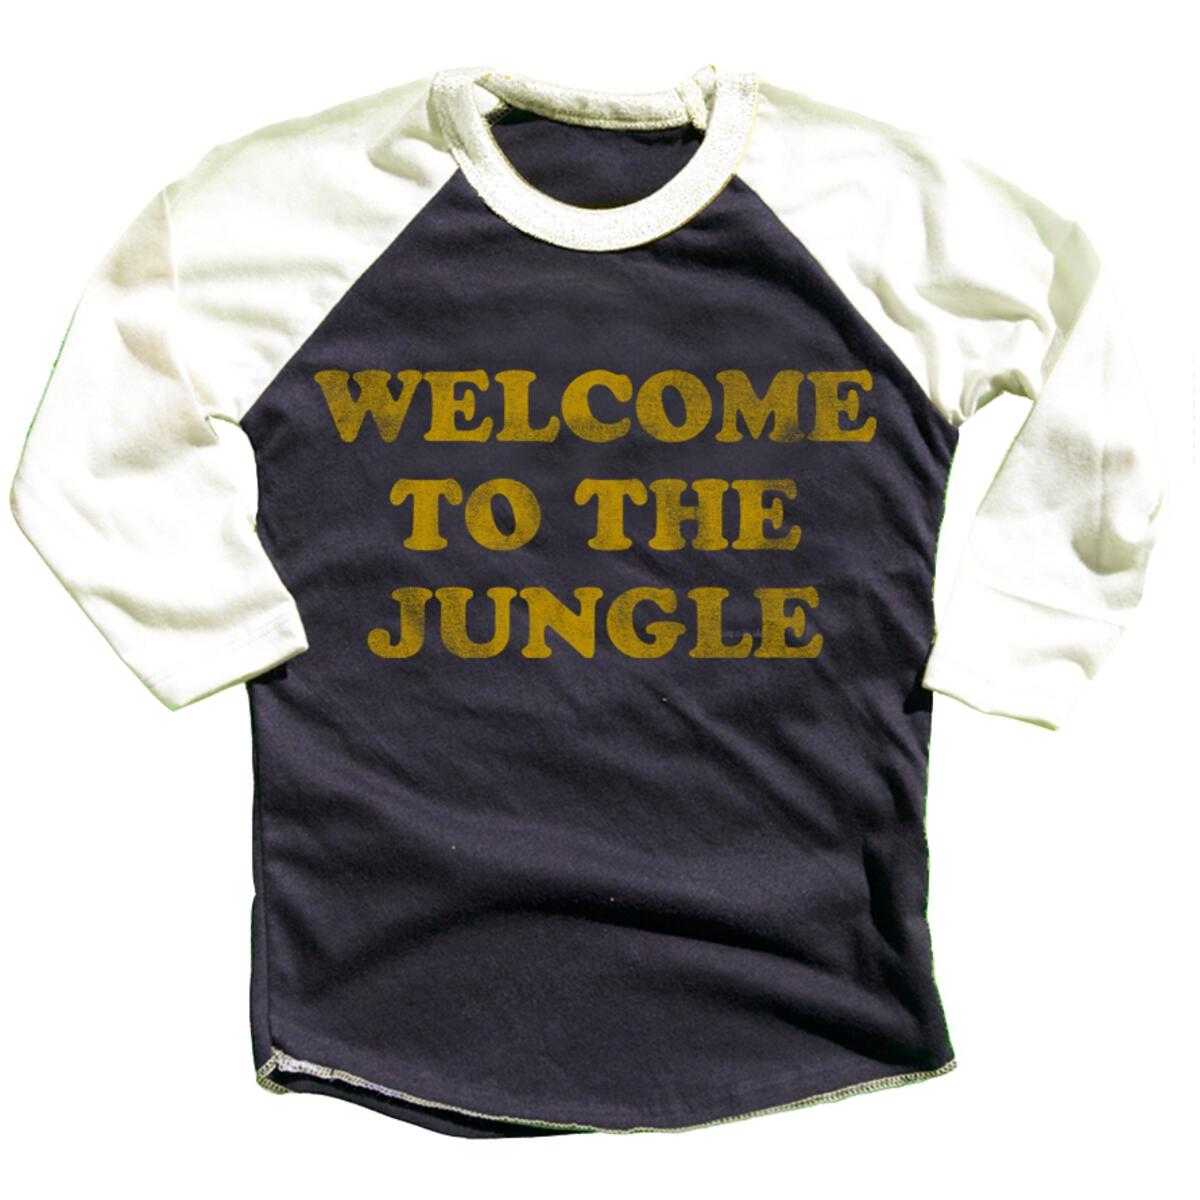 Welcome to the Jungle Recycled Raglan Tee - Twinkle Twinkle Little One